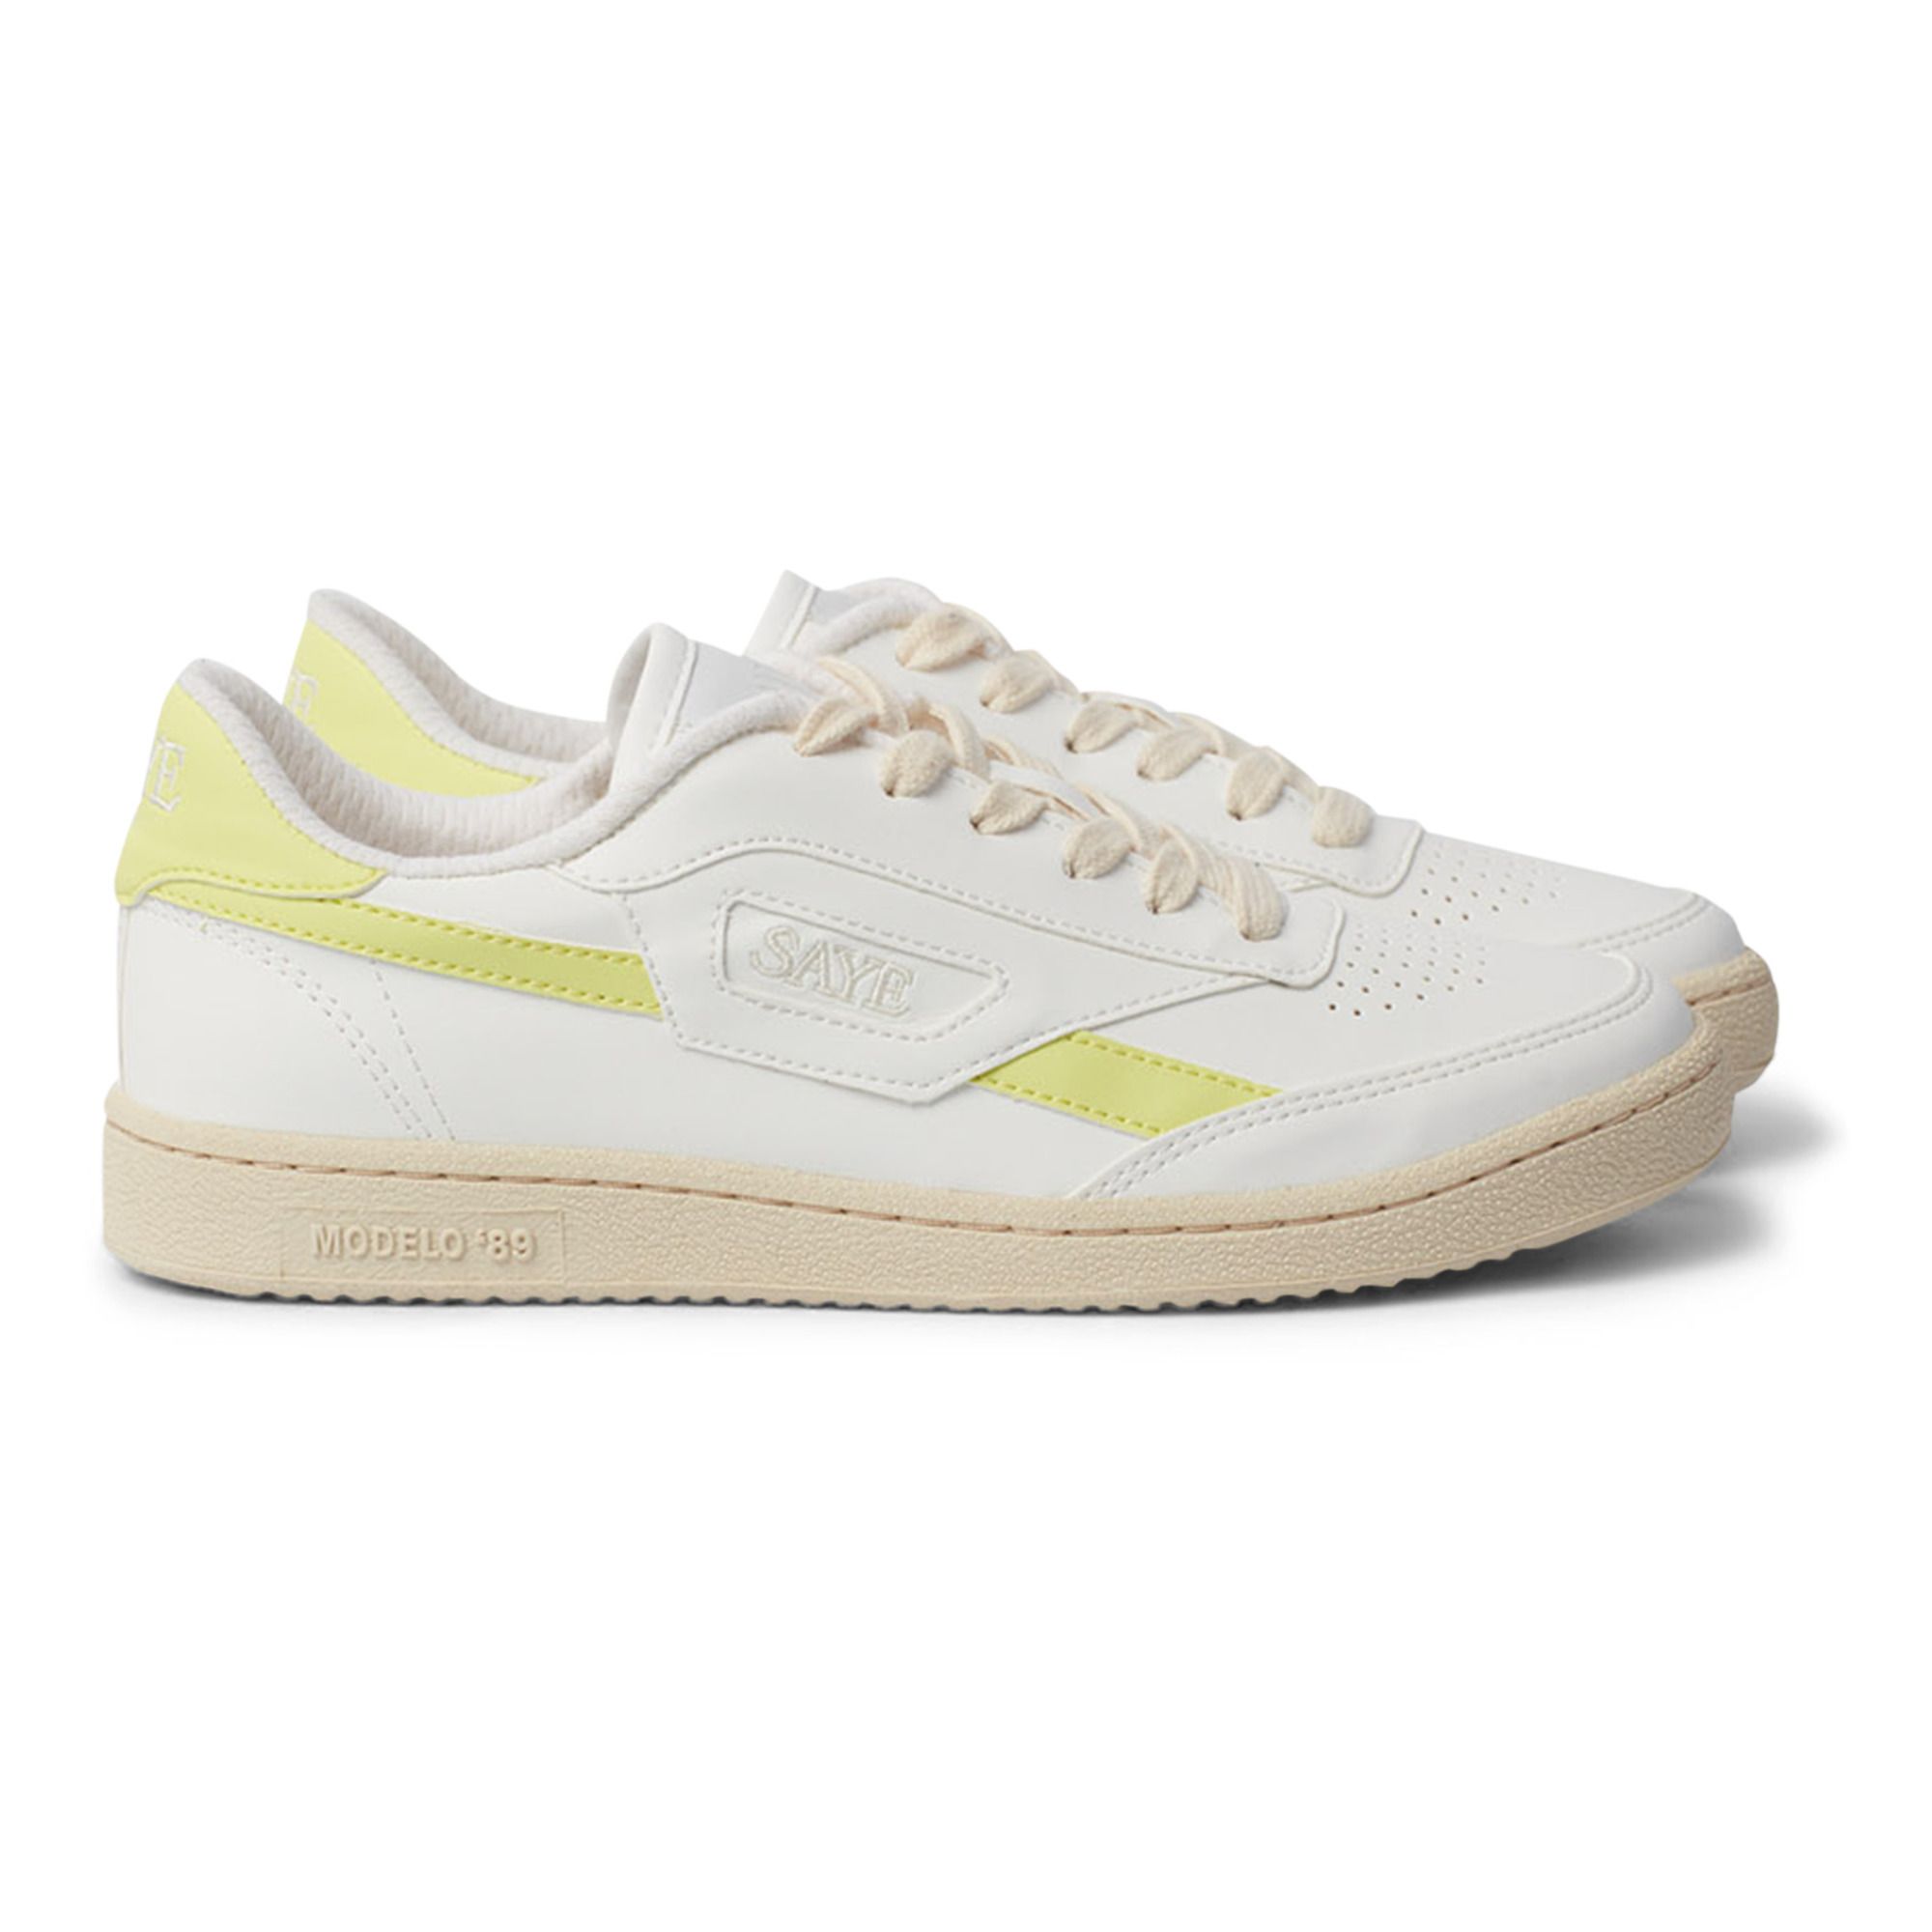 Omkostningsprocent ved godt Nysgerrighed Saye - '89 Vegan Coloured Sneakers - Yellow | Smallable